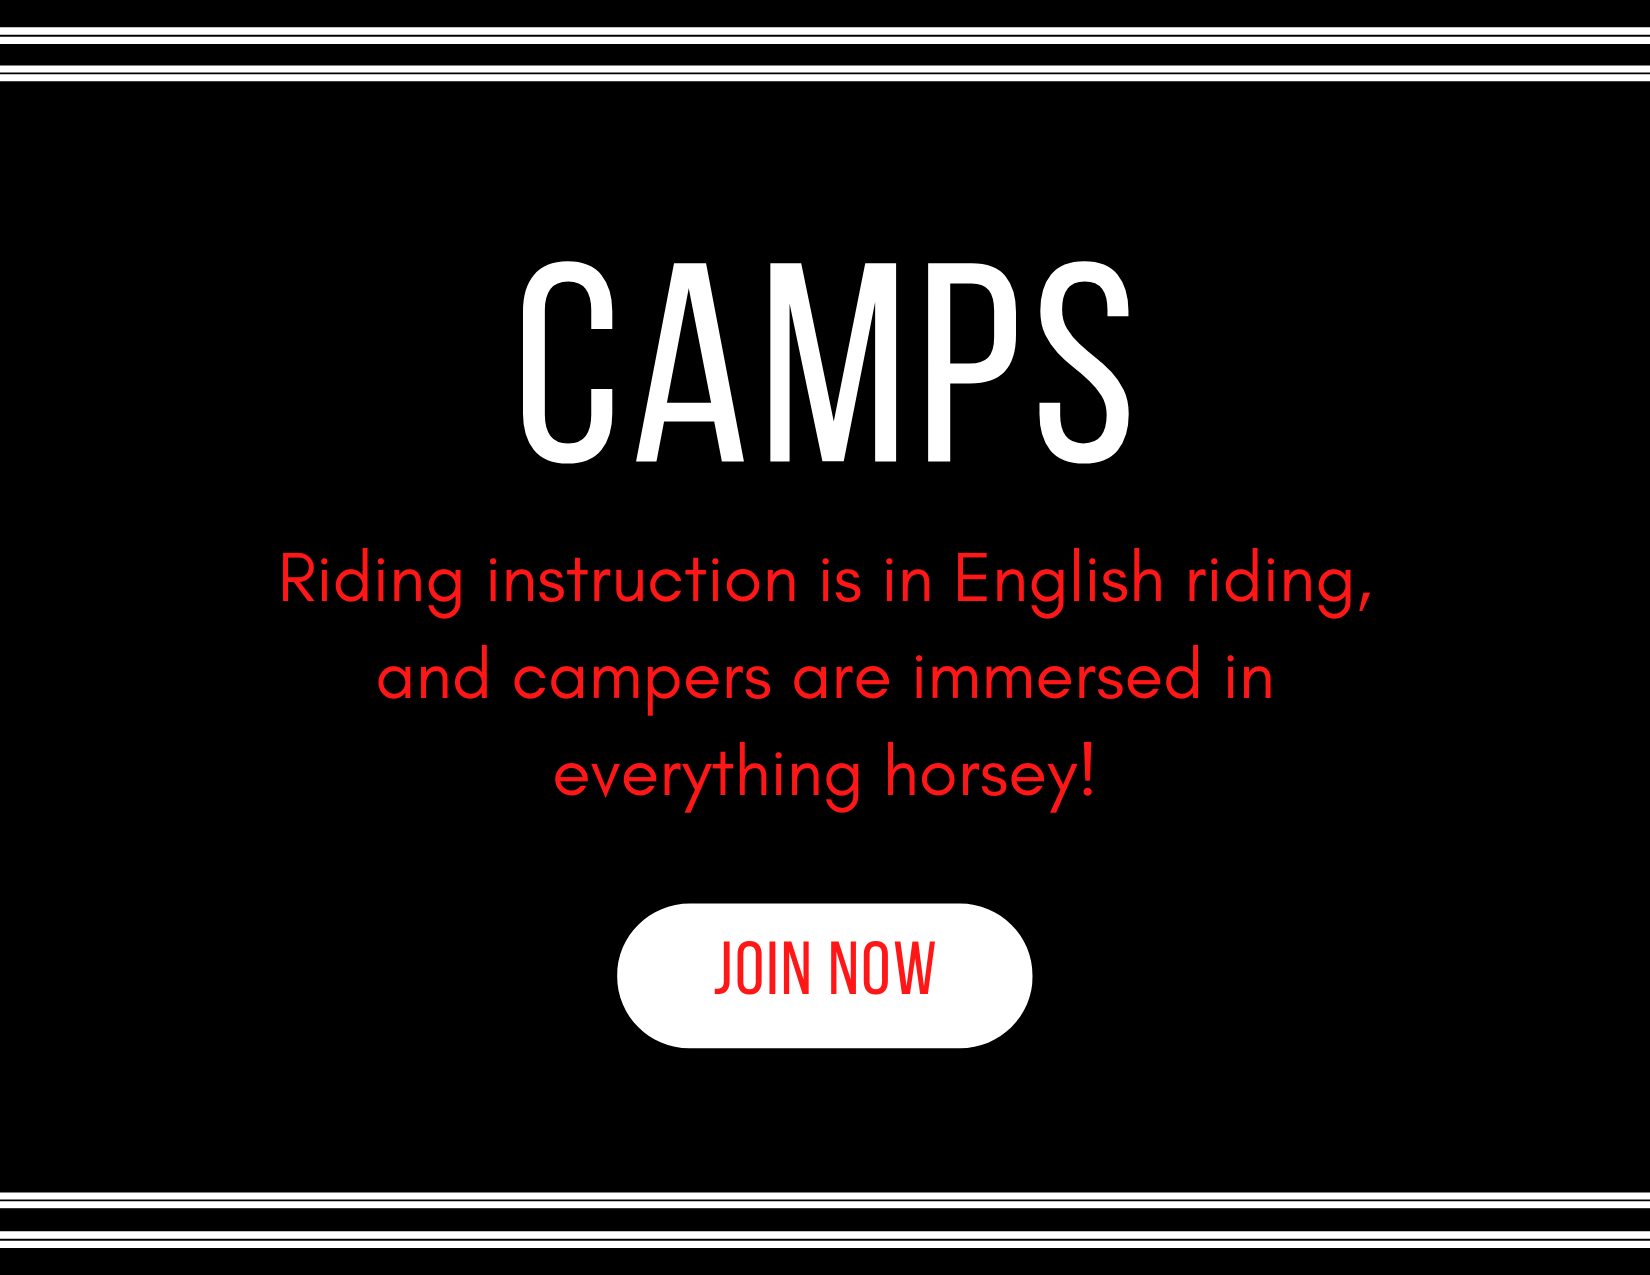 Summer riding camps immerse youngsters in everything horsey!